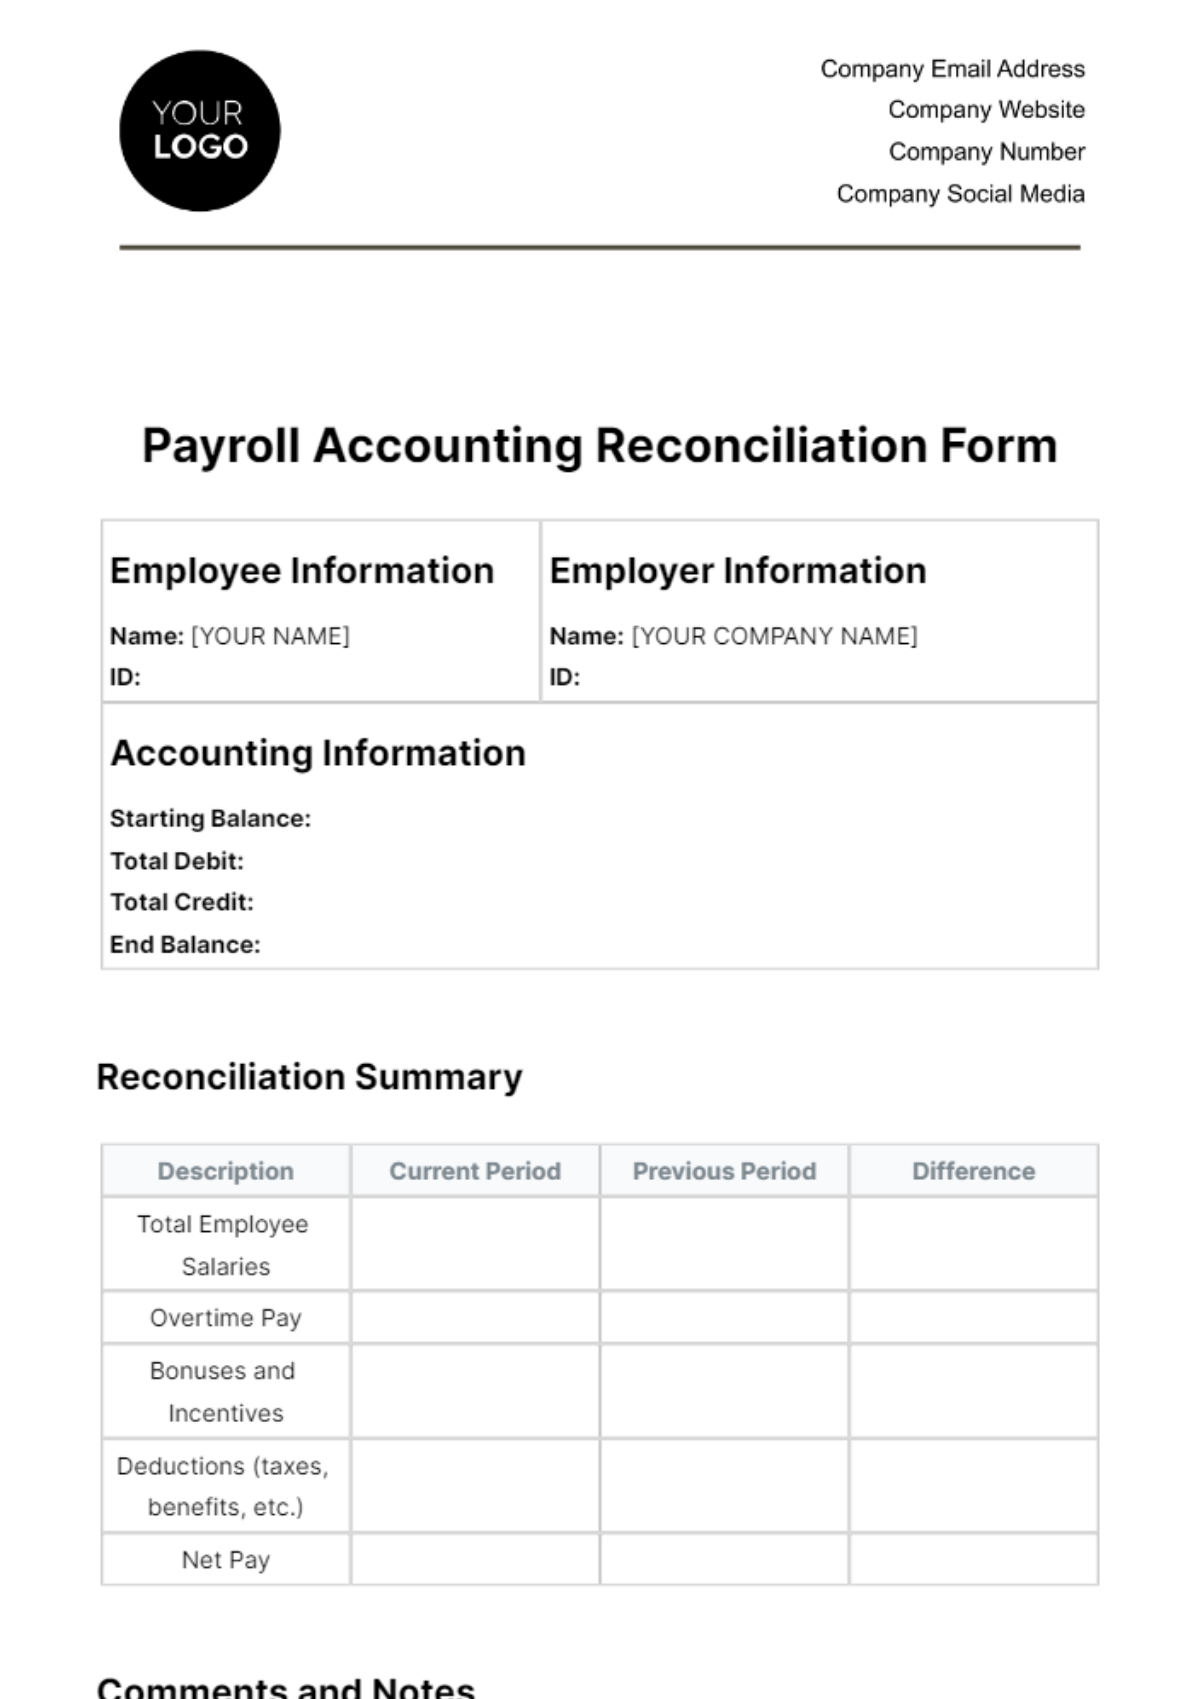 Payroll Accounting Reconciliation Form Template